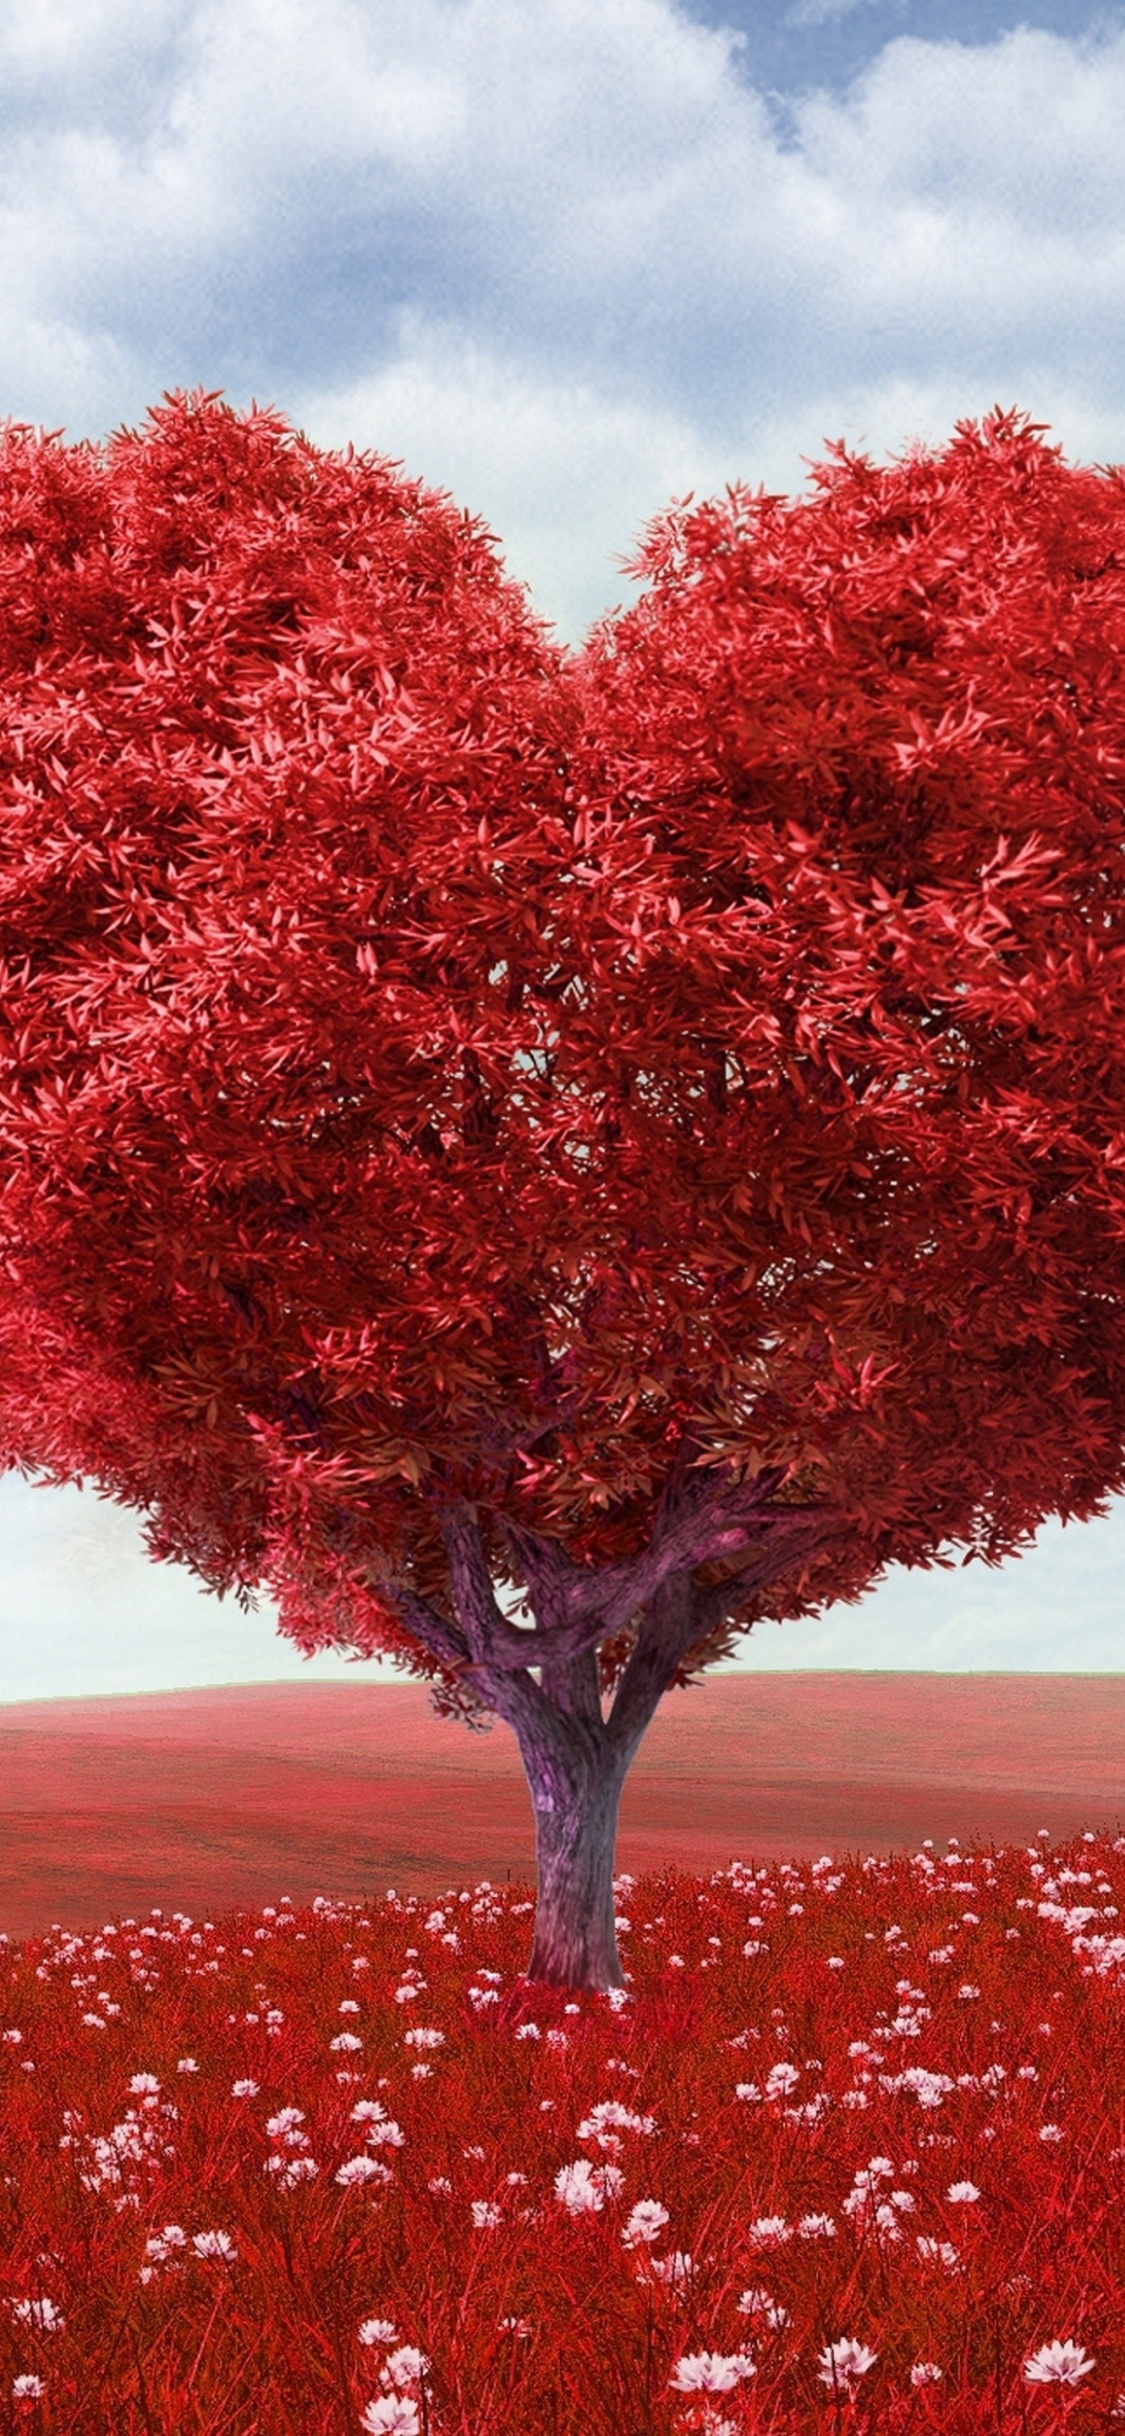 Red Leaf Tree Under Cloudy Sky During Daytime. Wallpaper in 1125x2436 Resolution